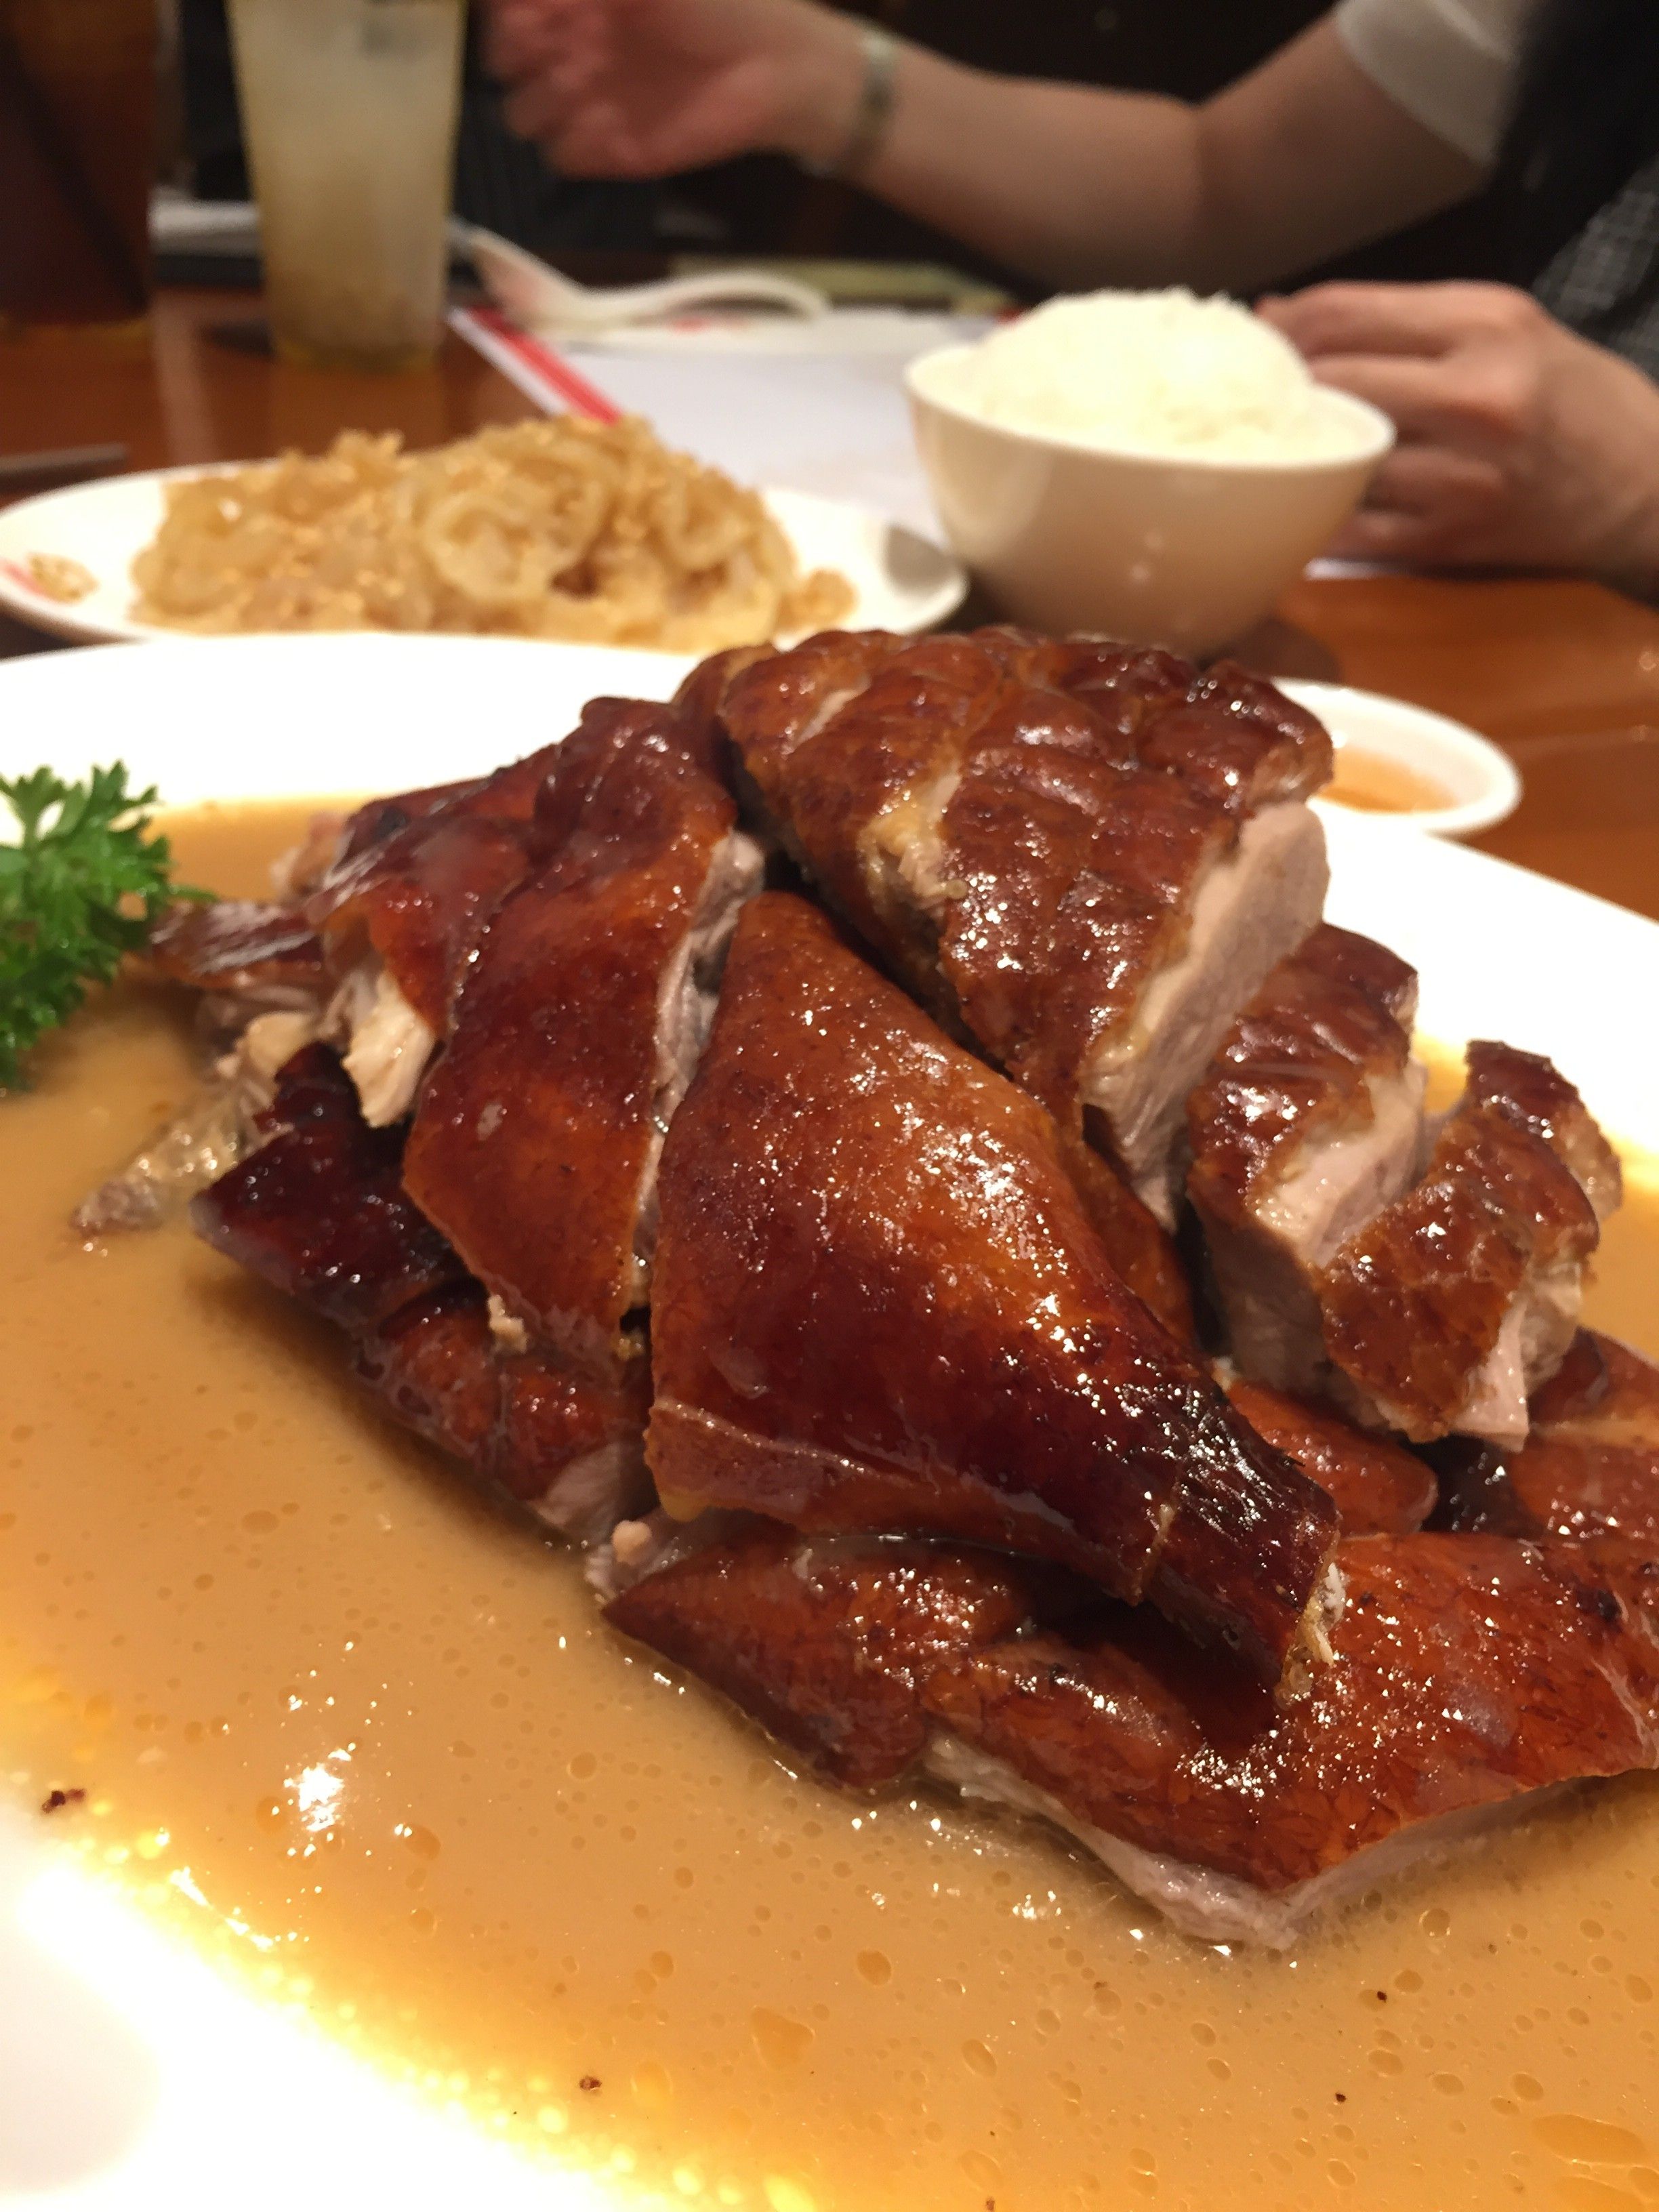 Caption: A photo of the roasted duck specialty at Kam’s Roast in Singapore. The meat is cut in big chunks, but still held together, with brownish sauce underneath.  (Local Guide @AngieYC)